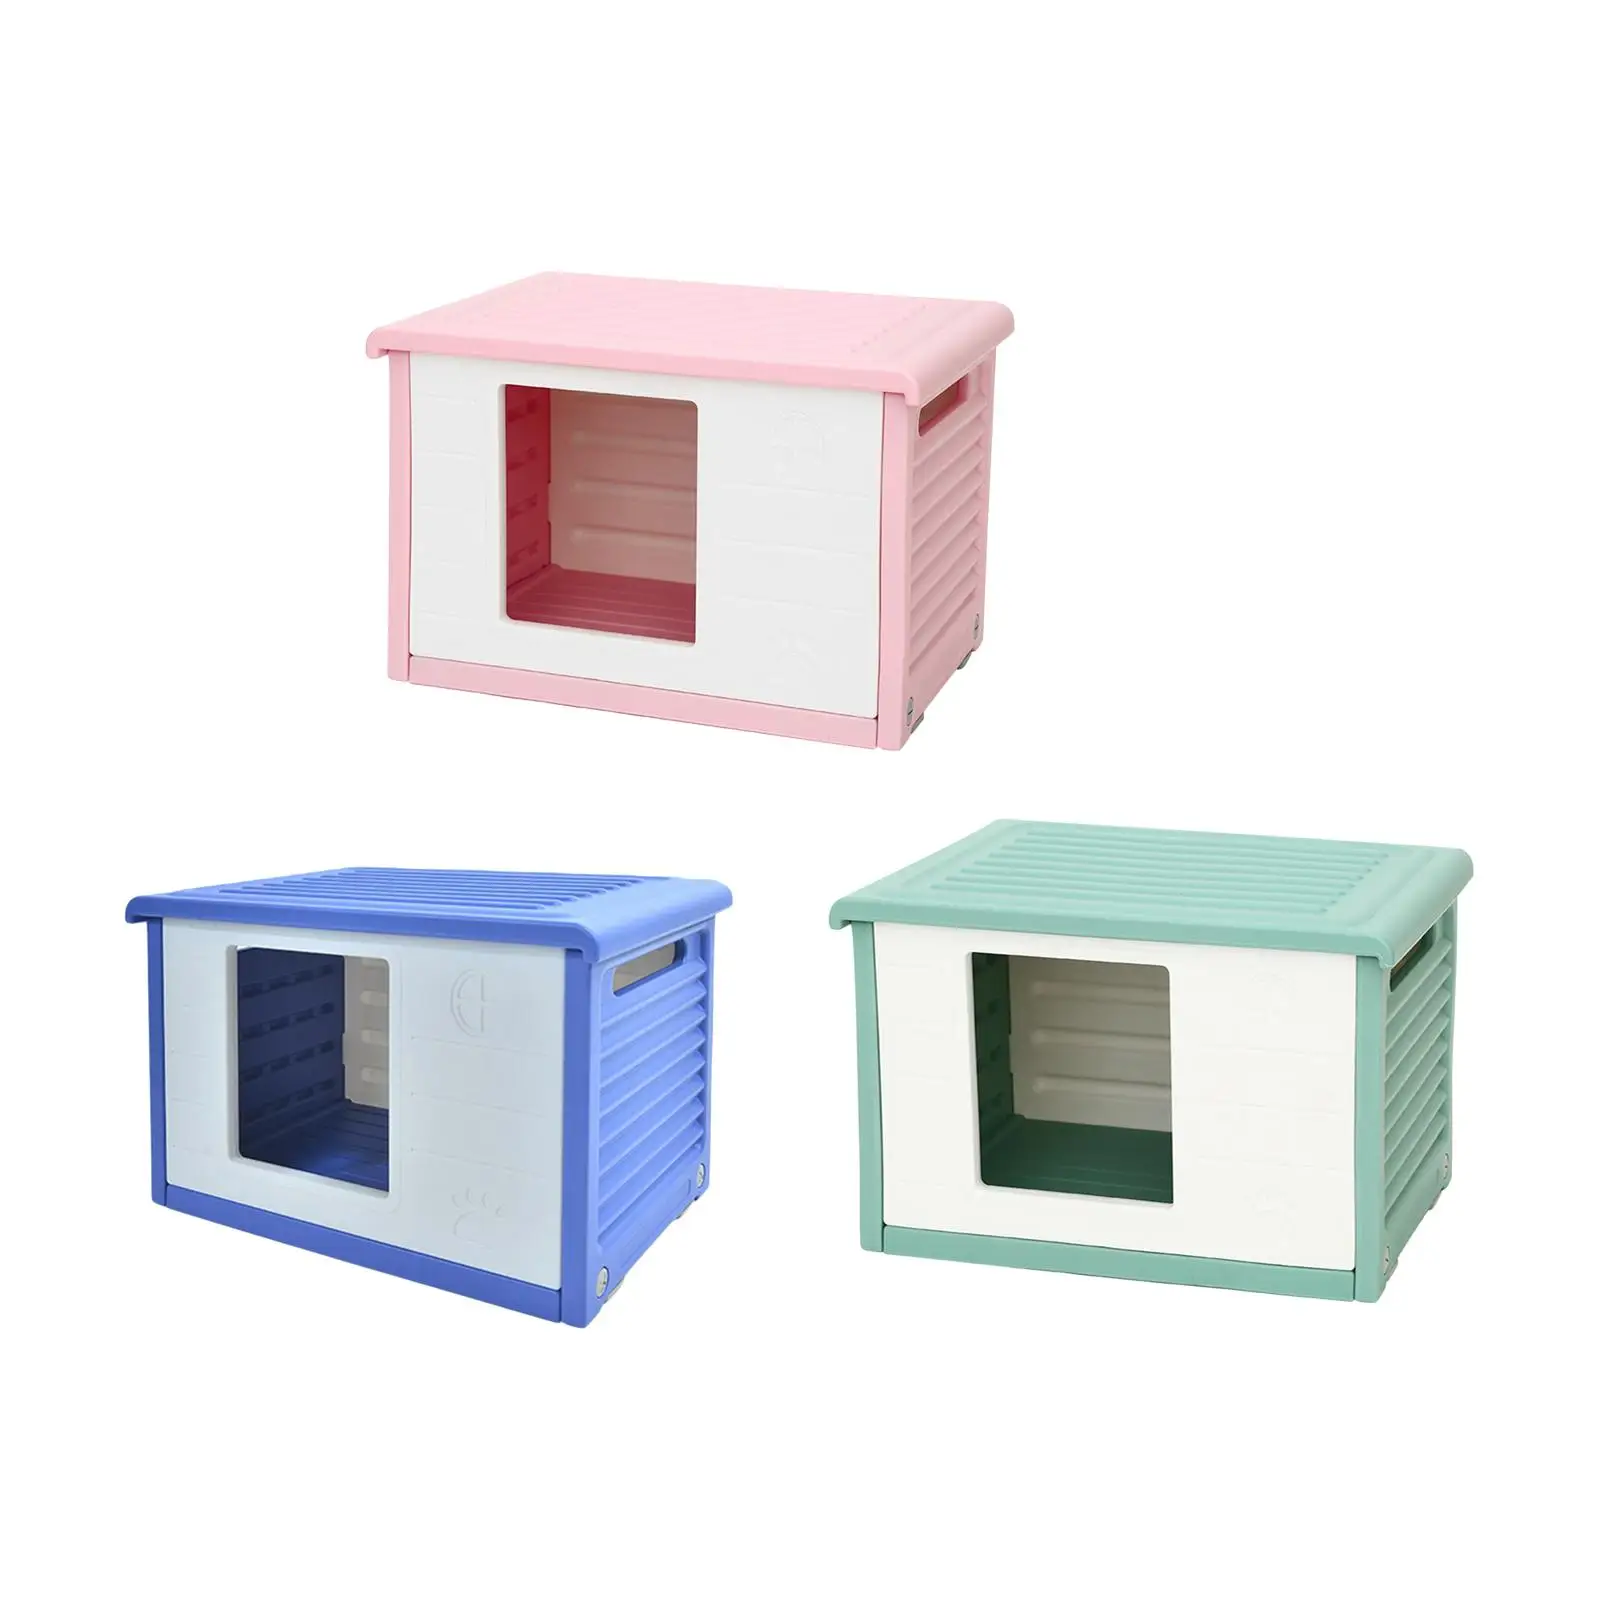 

Stray Cats Shelter Pet Supplies Raised Floor Habitats Furniture Portable Kennel for Outdoor Small Dogs Puppy Kitten Cats Indoor